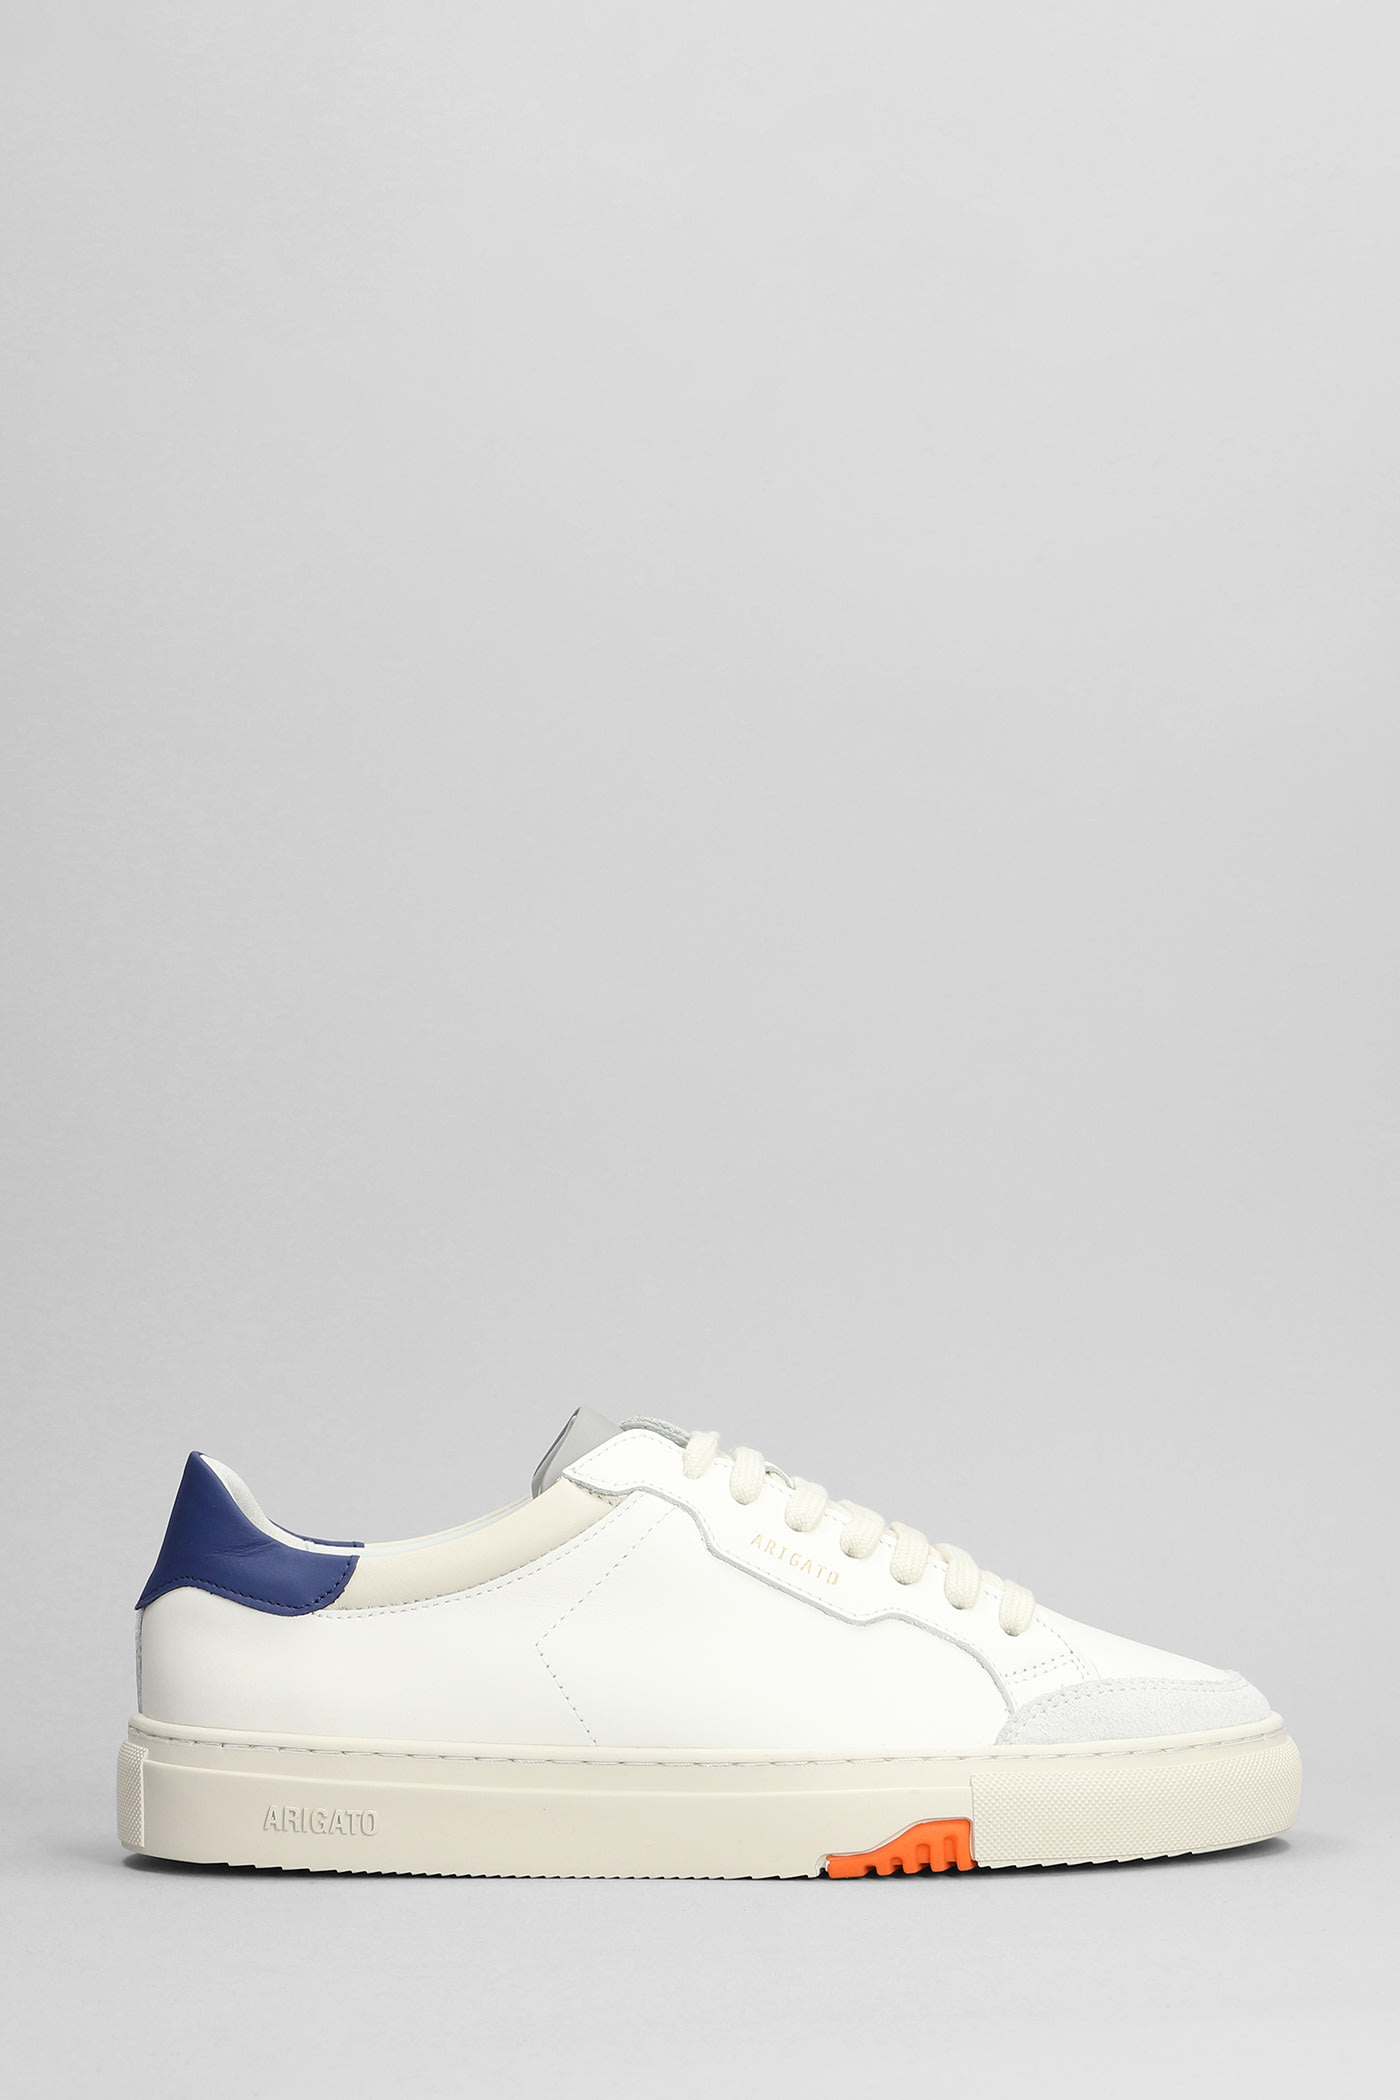 AXEL ARIGATO CLEAN 180 SNEAKERS IN WHITE LEATHER